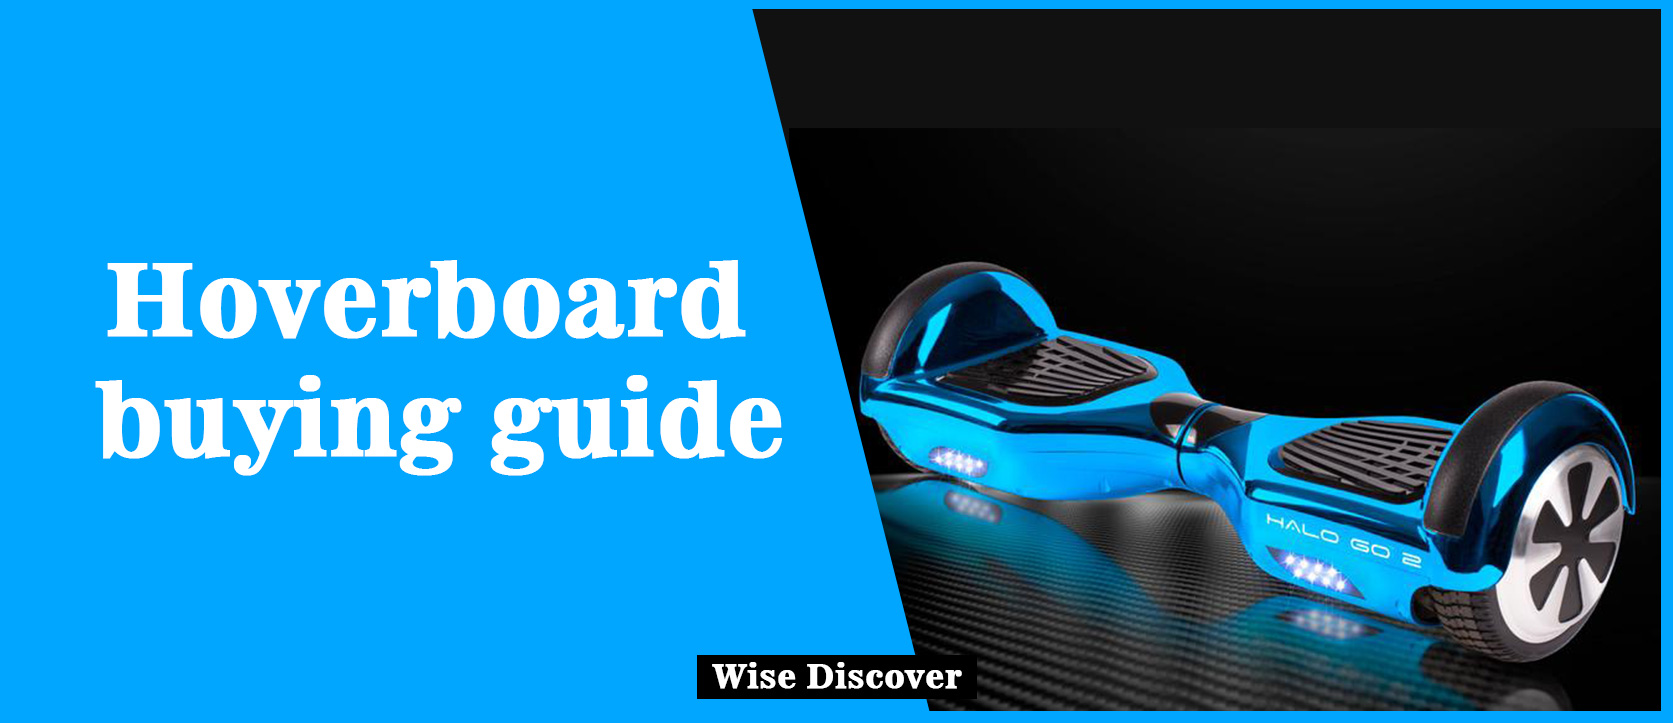 hoverboard-buying-guide